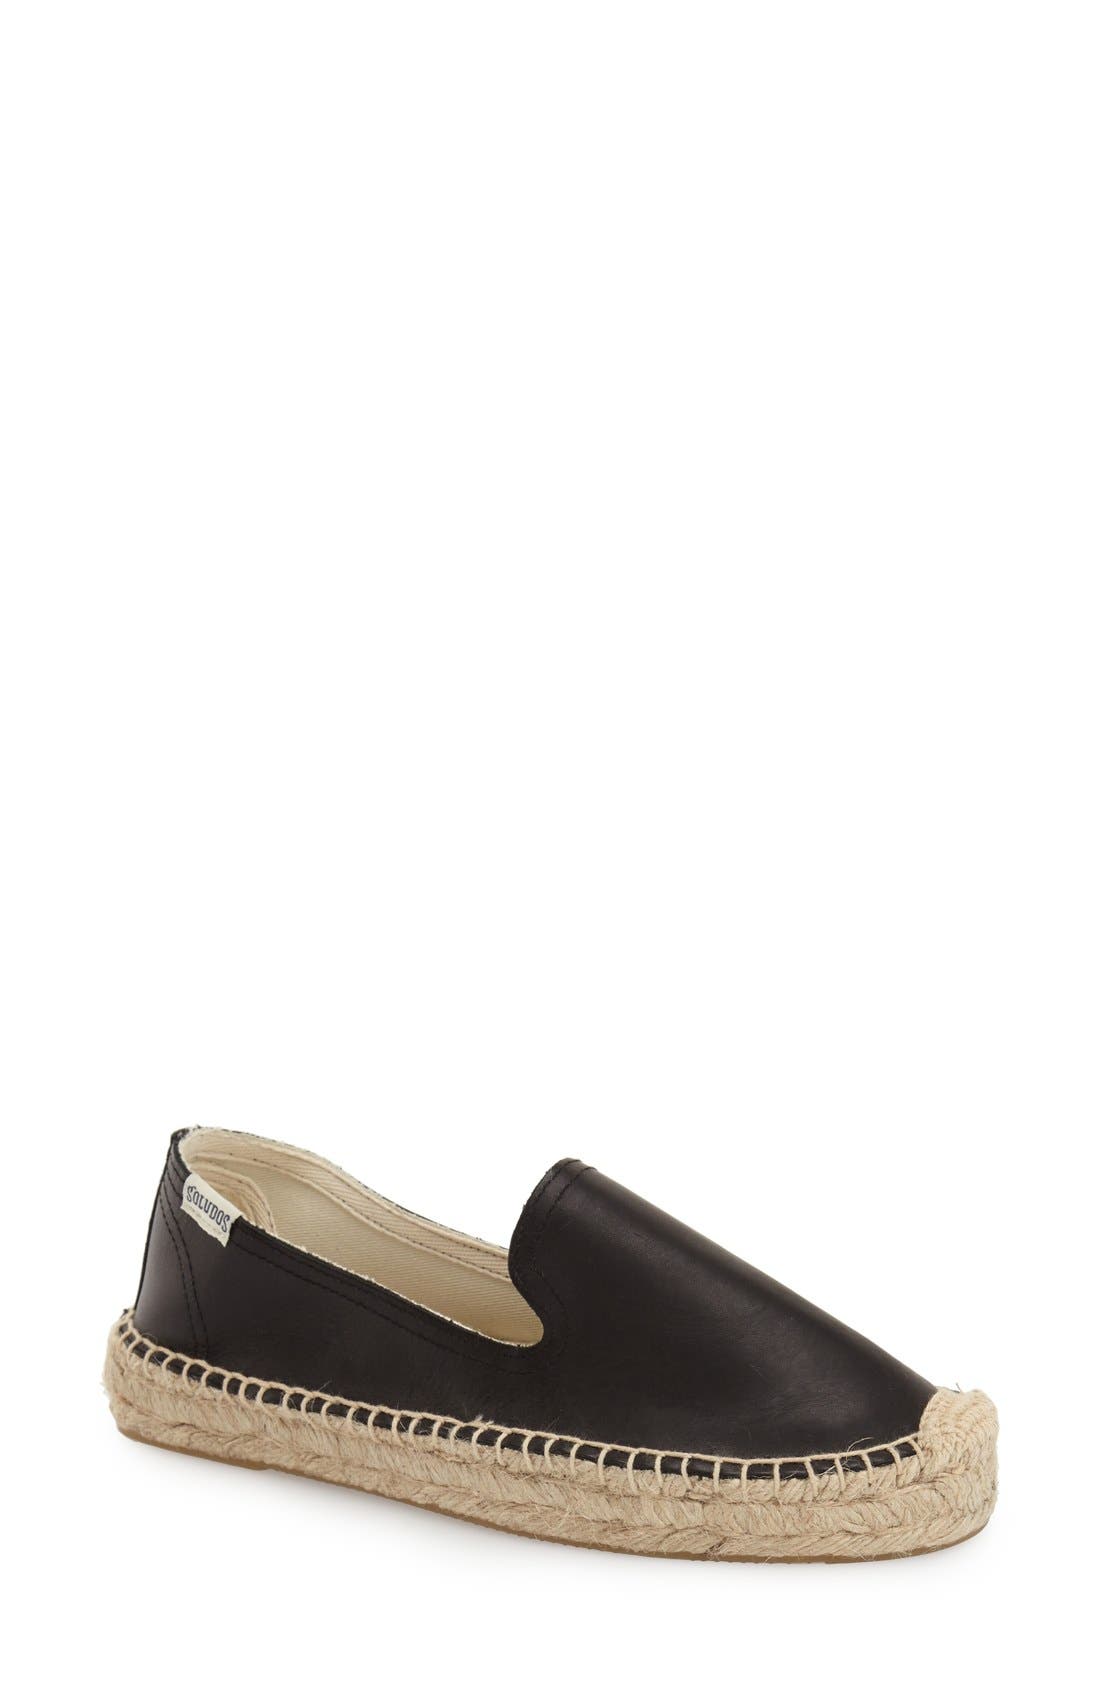 Women's Soludos Shoes | Nordstrom